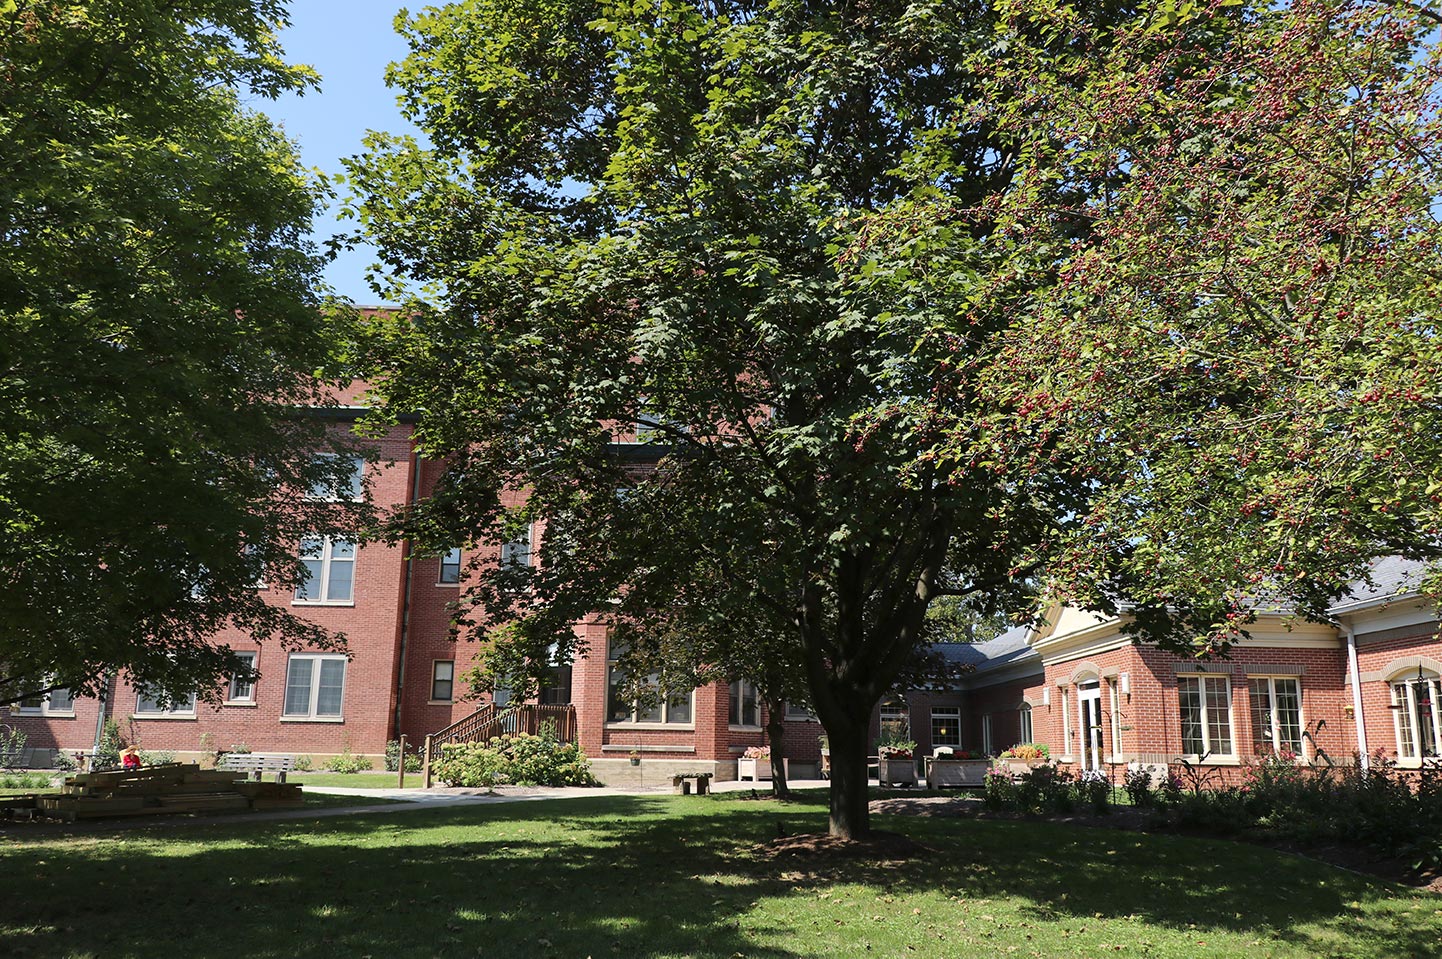 Exterior view of Lourdes Hall